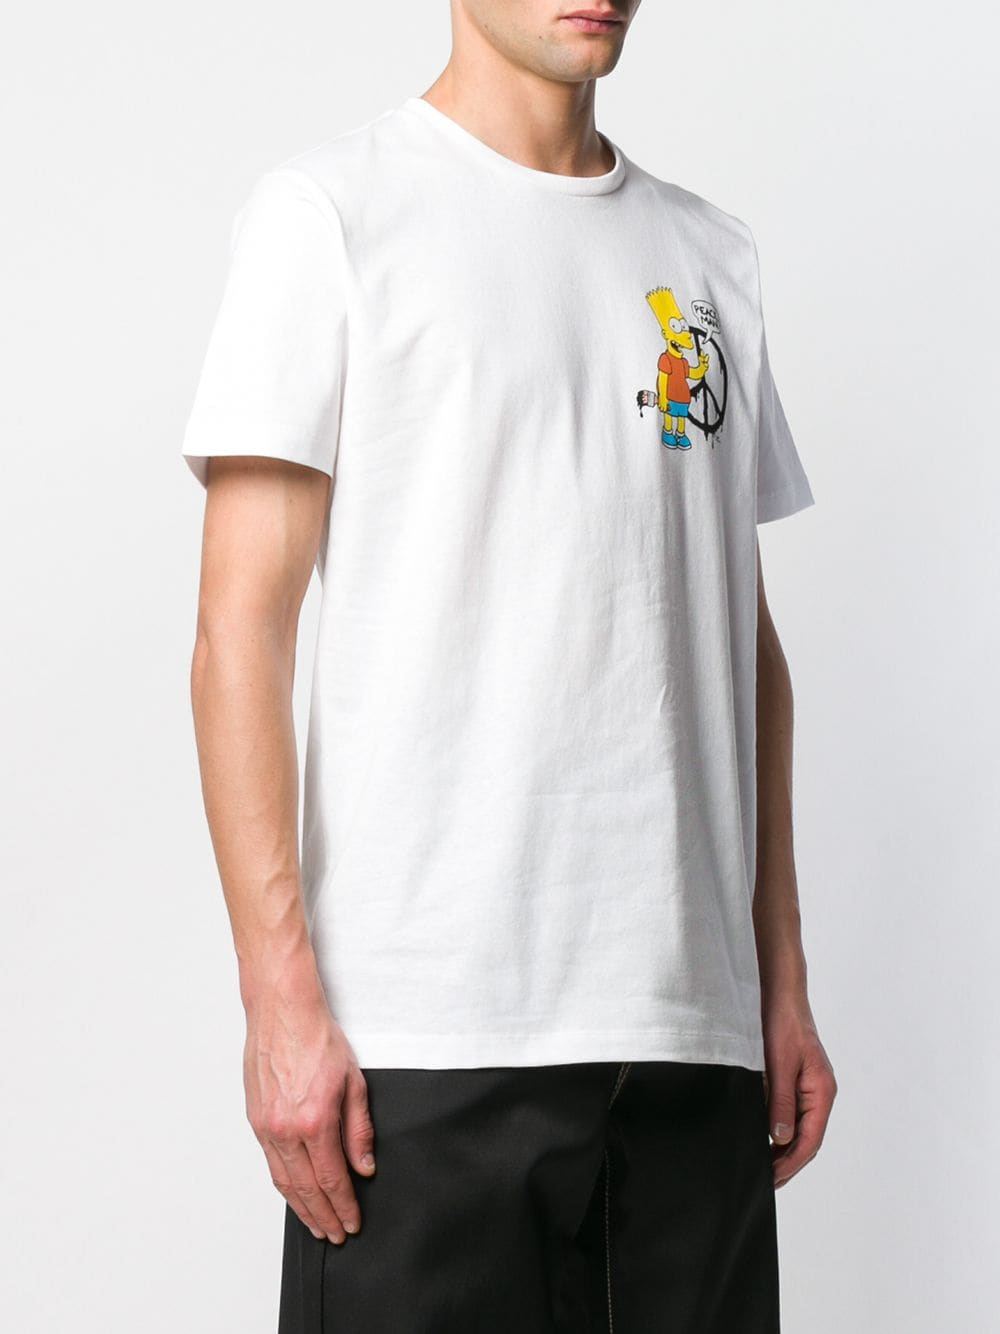 Off-White Bart Simpson print T-shirt $390 - Buy Online SS19 - Quick ...